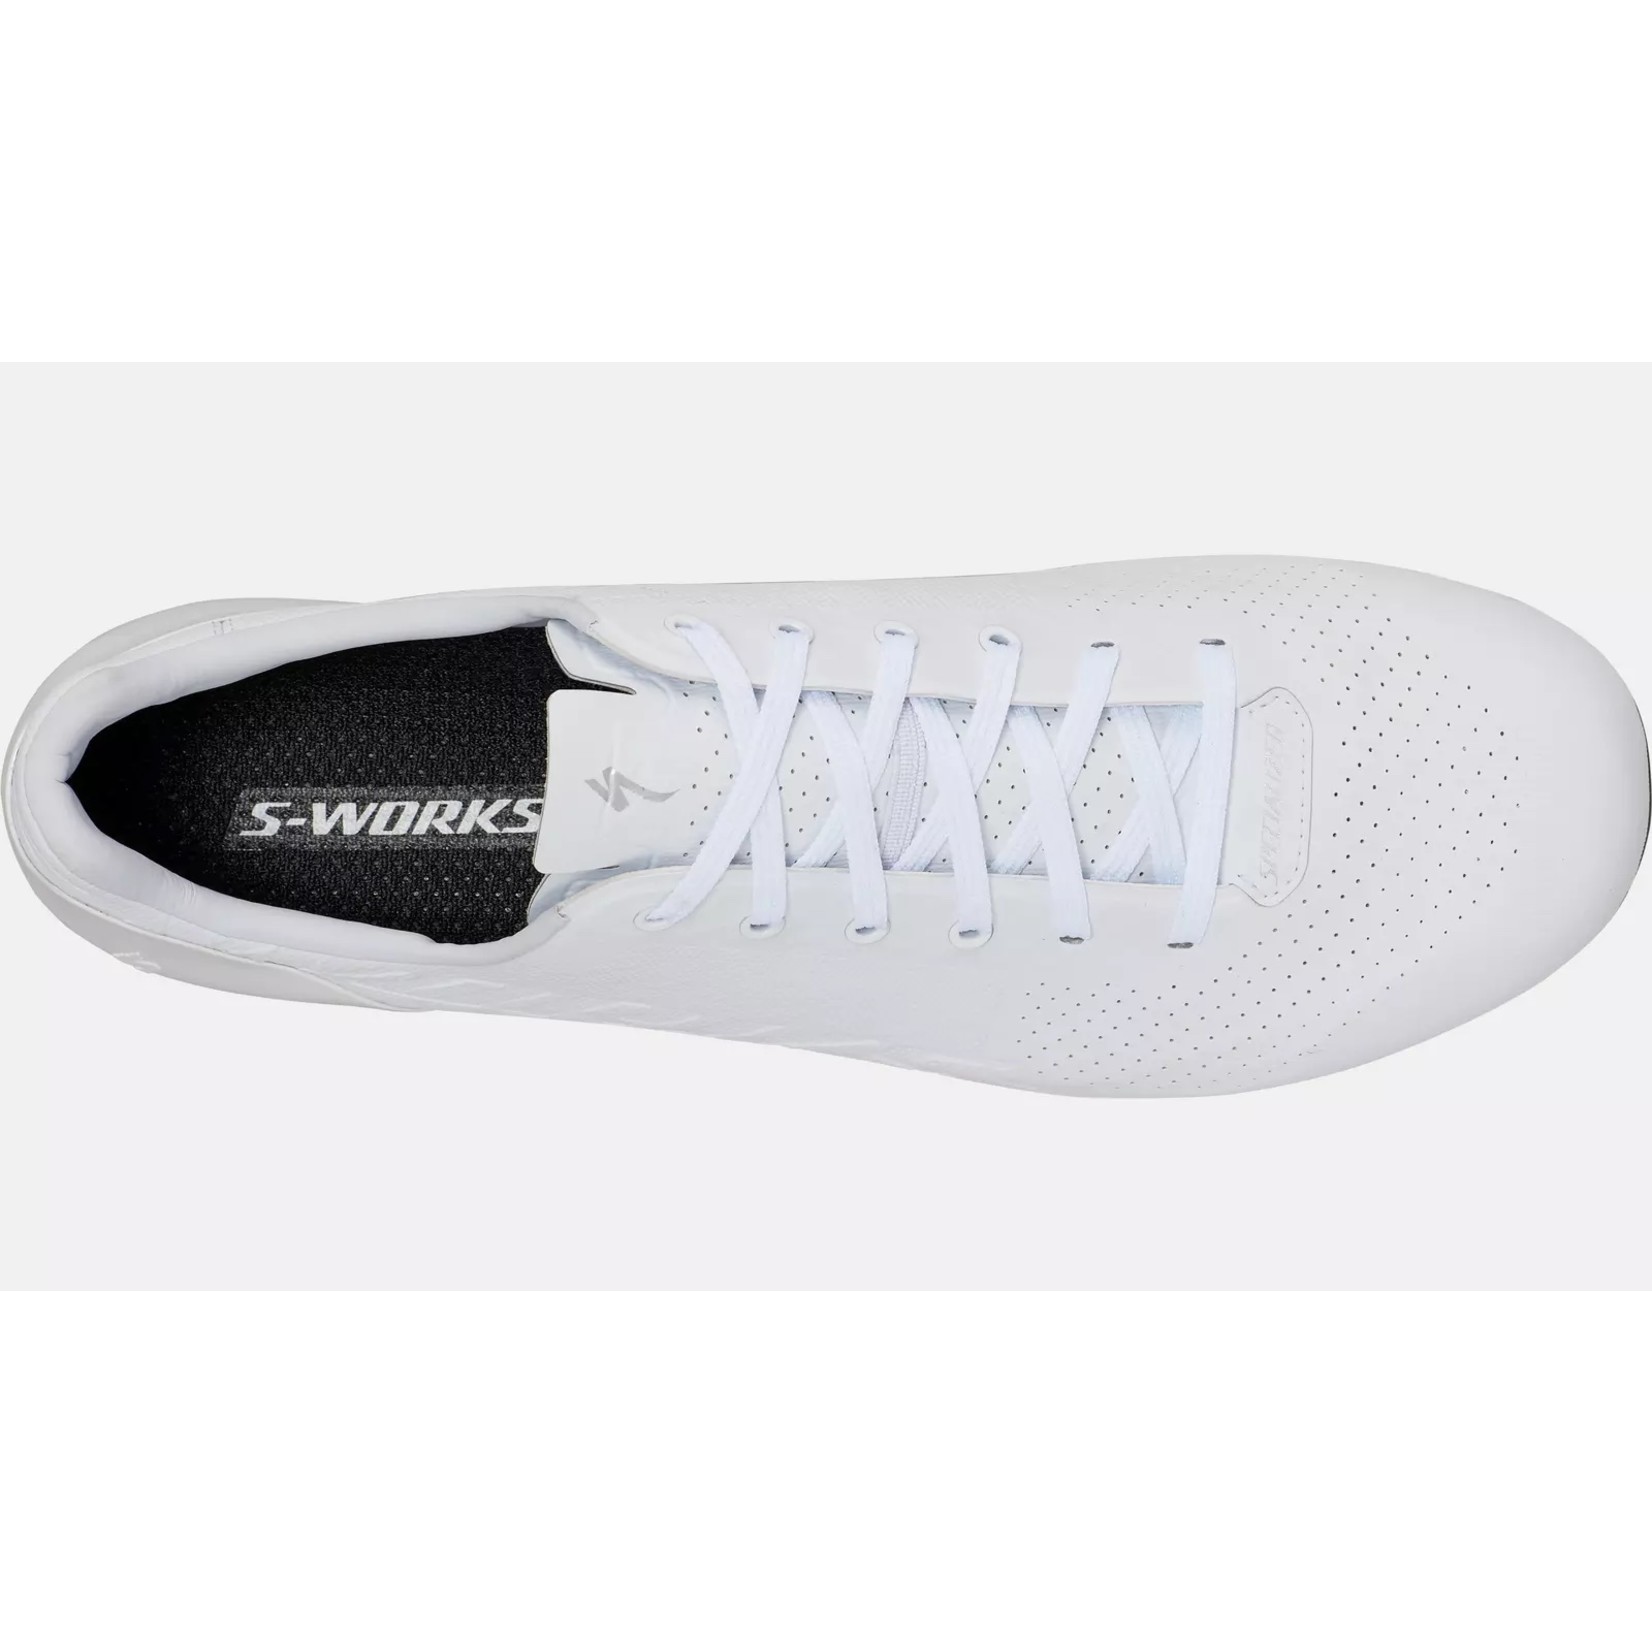 Specialized S-WORKS 7 LACE ROAD SHOE - WHITE